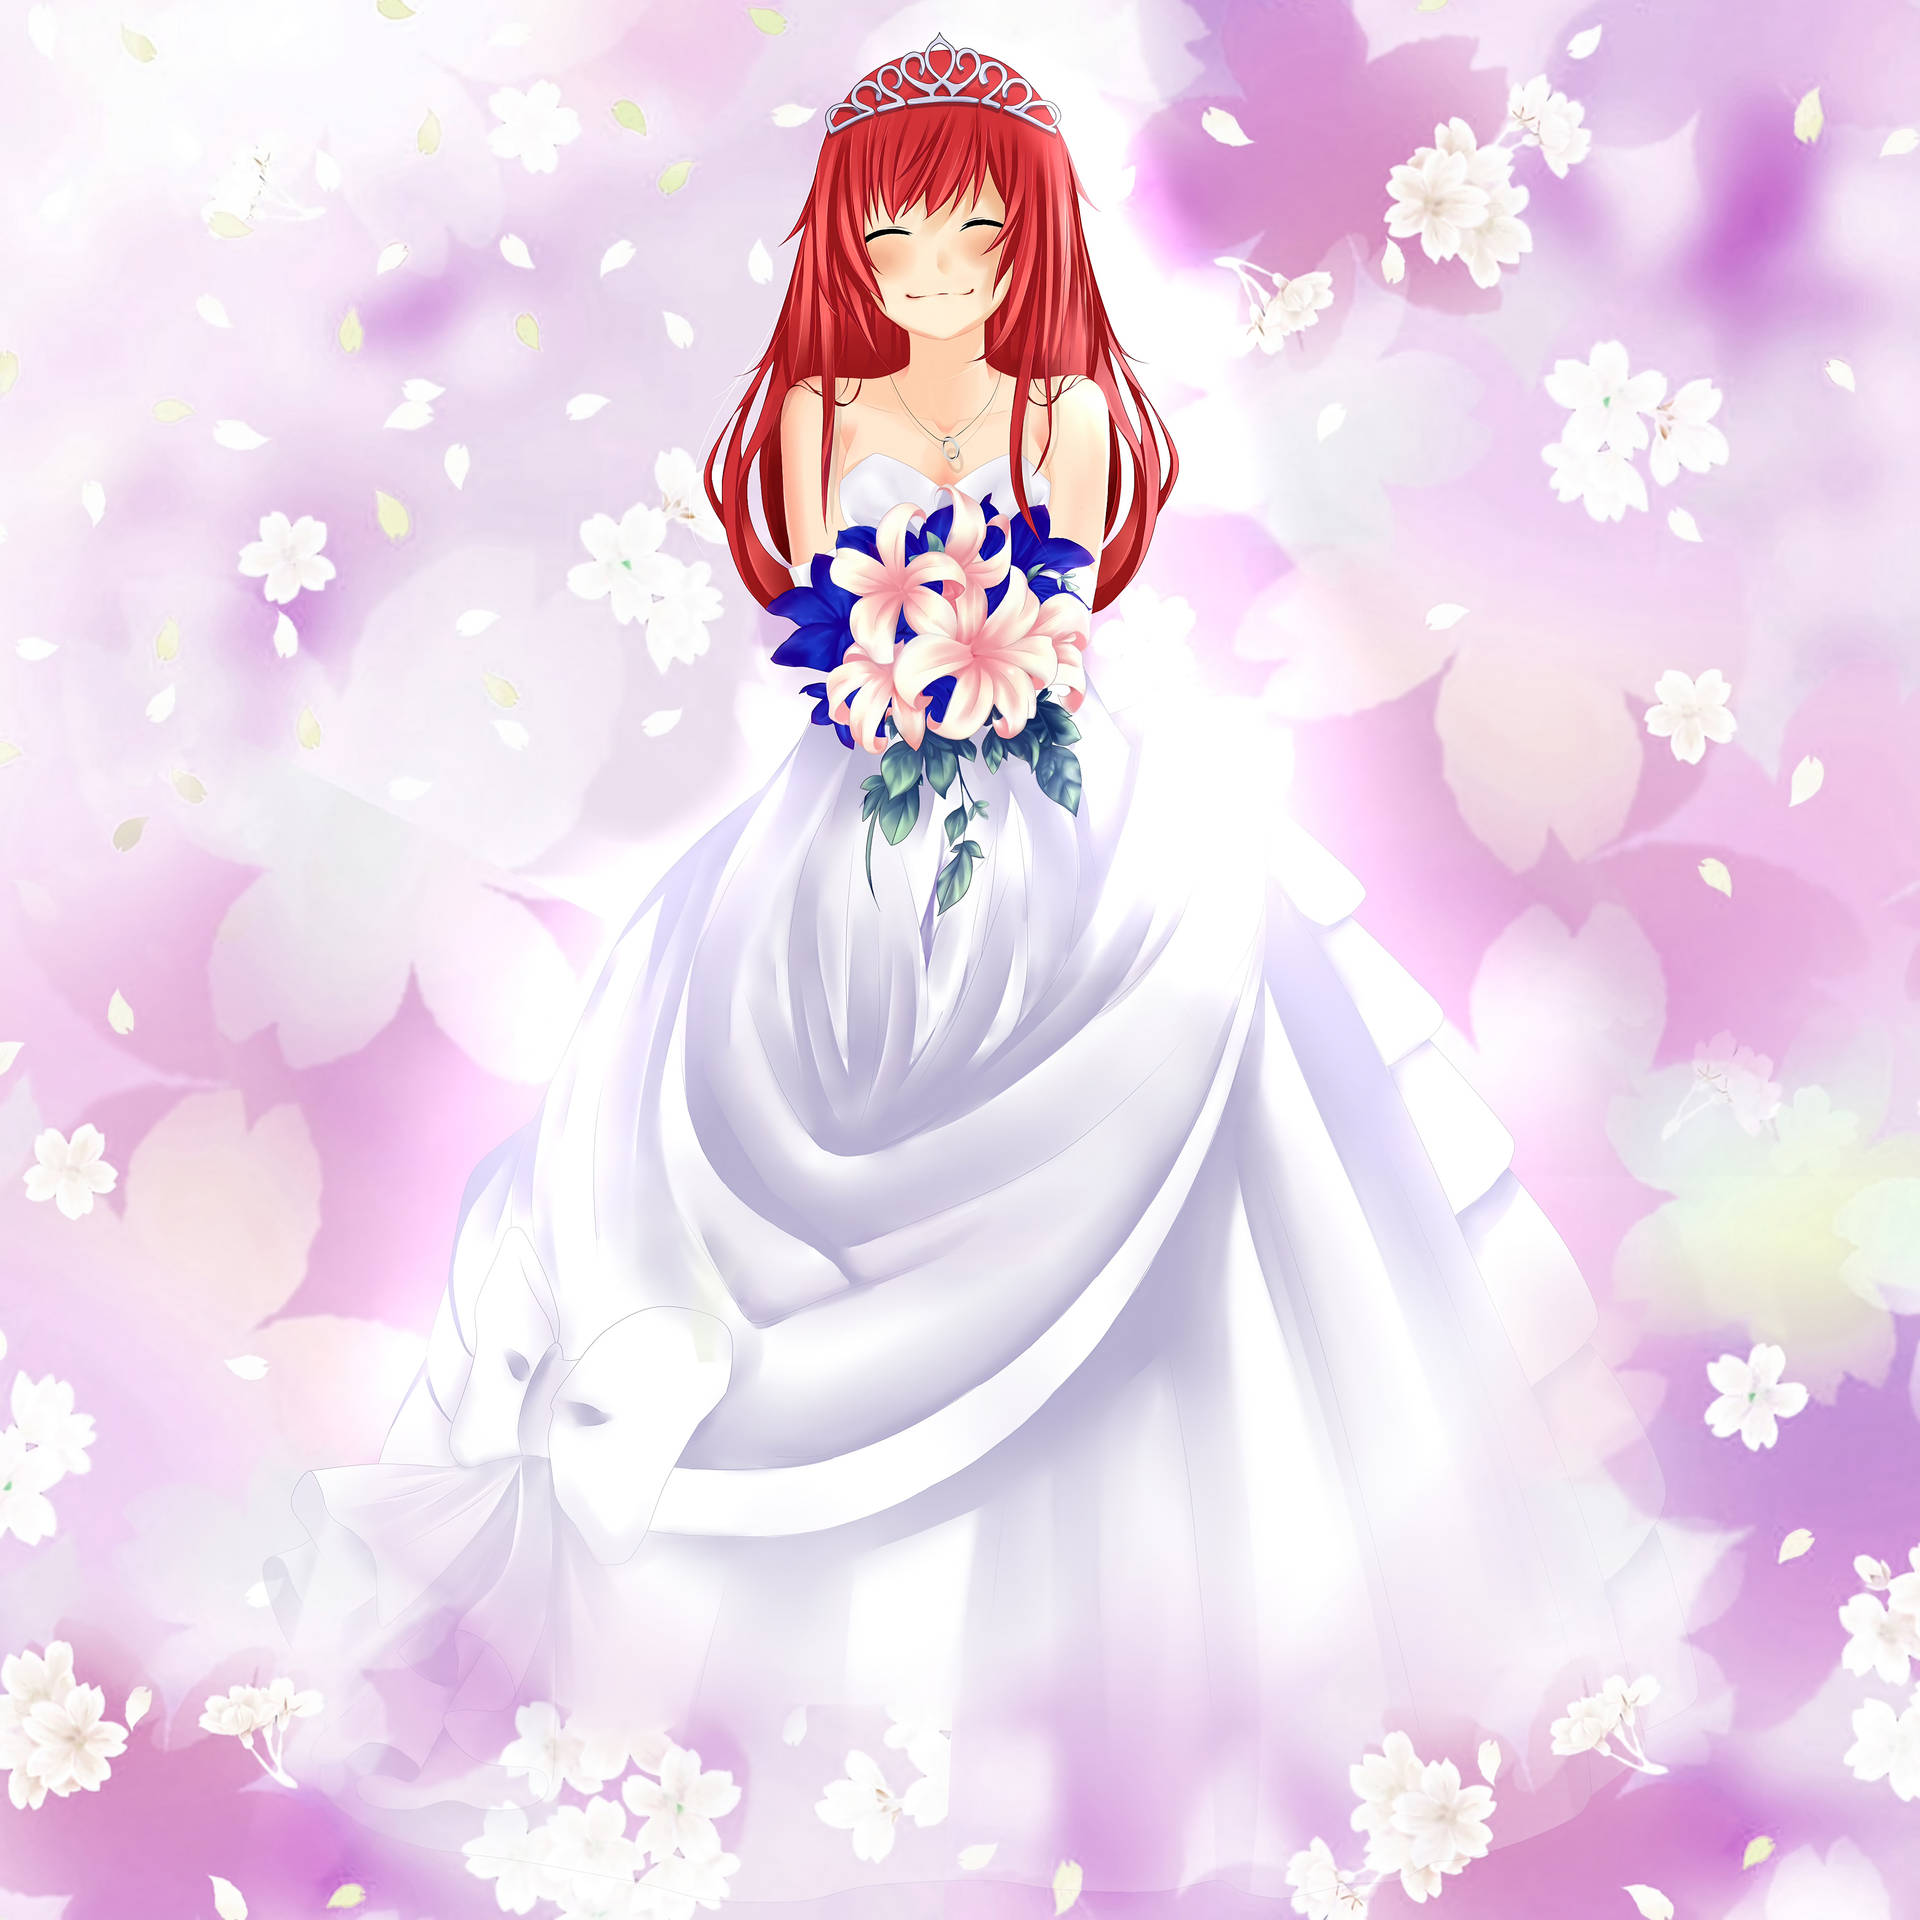 Anime Wedding Girls Pictures JPG For Free Download | Free HD Photo